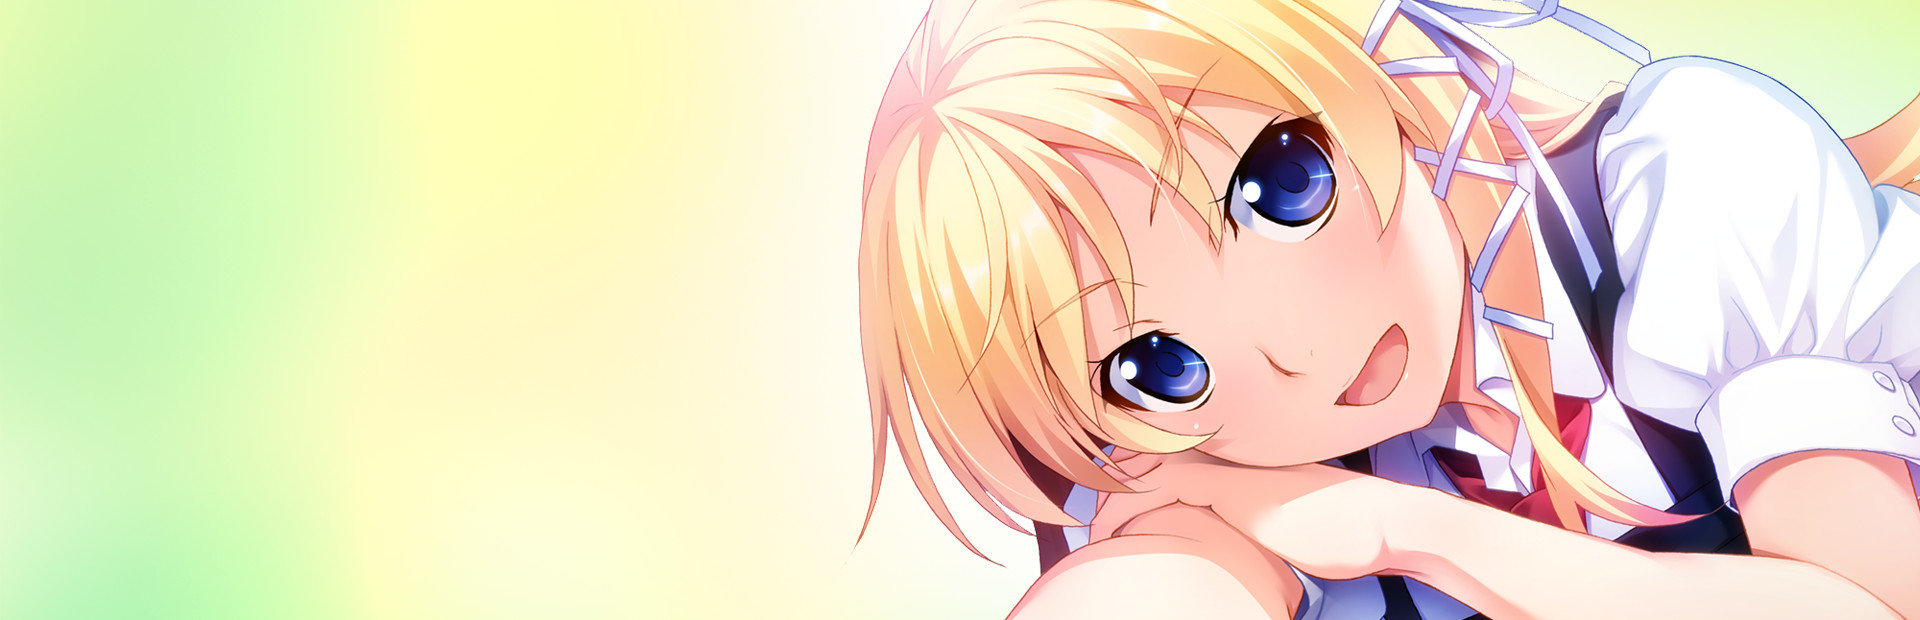 The Melody of Grisaia cover image